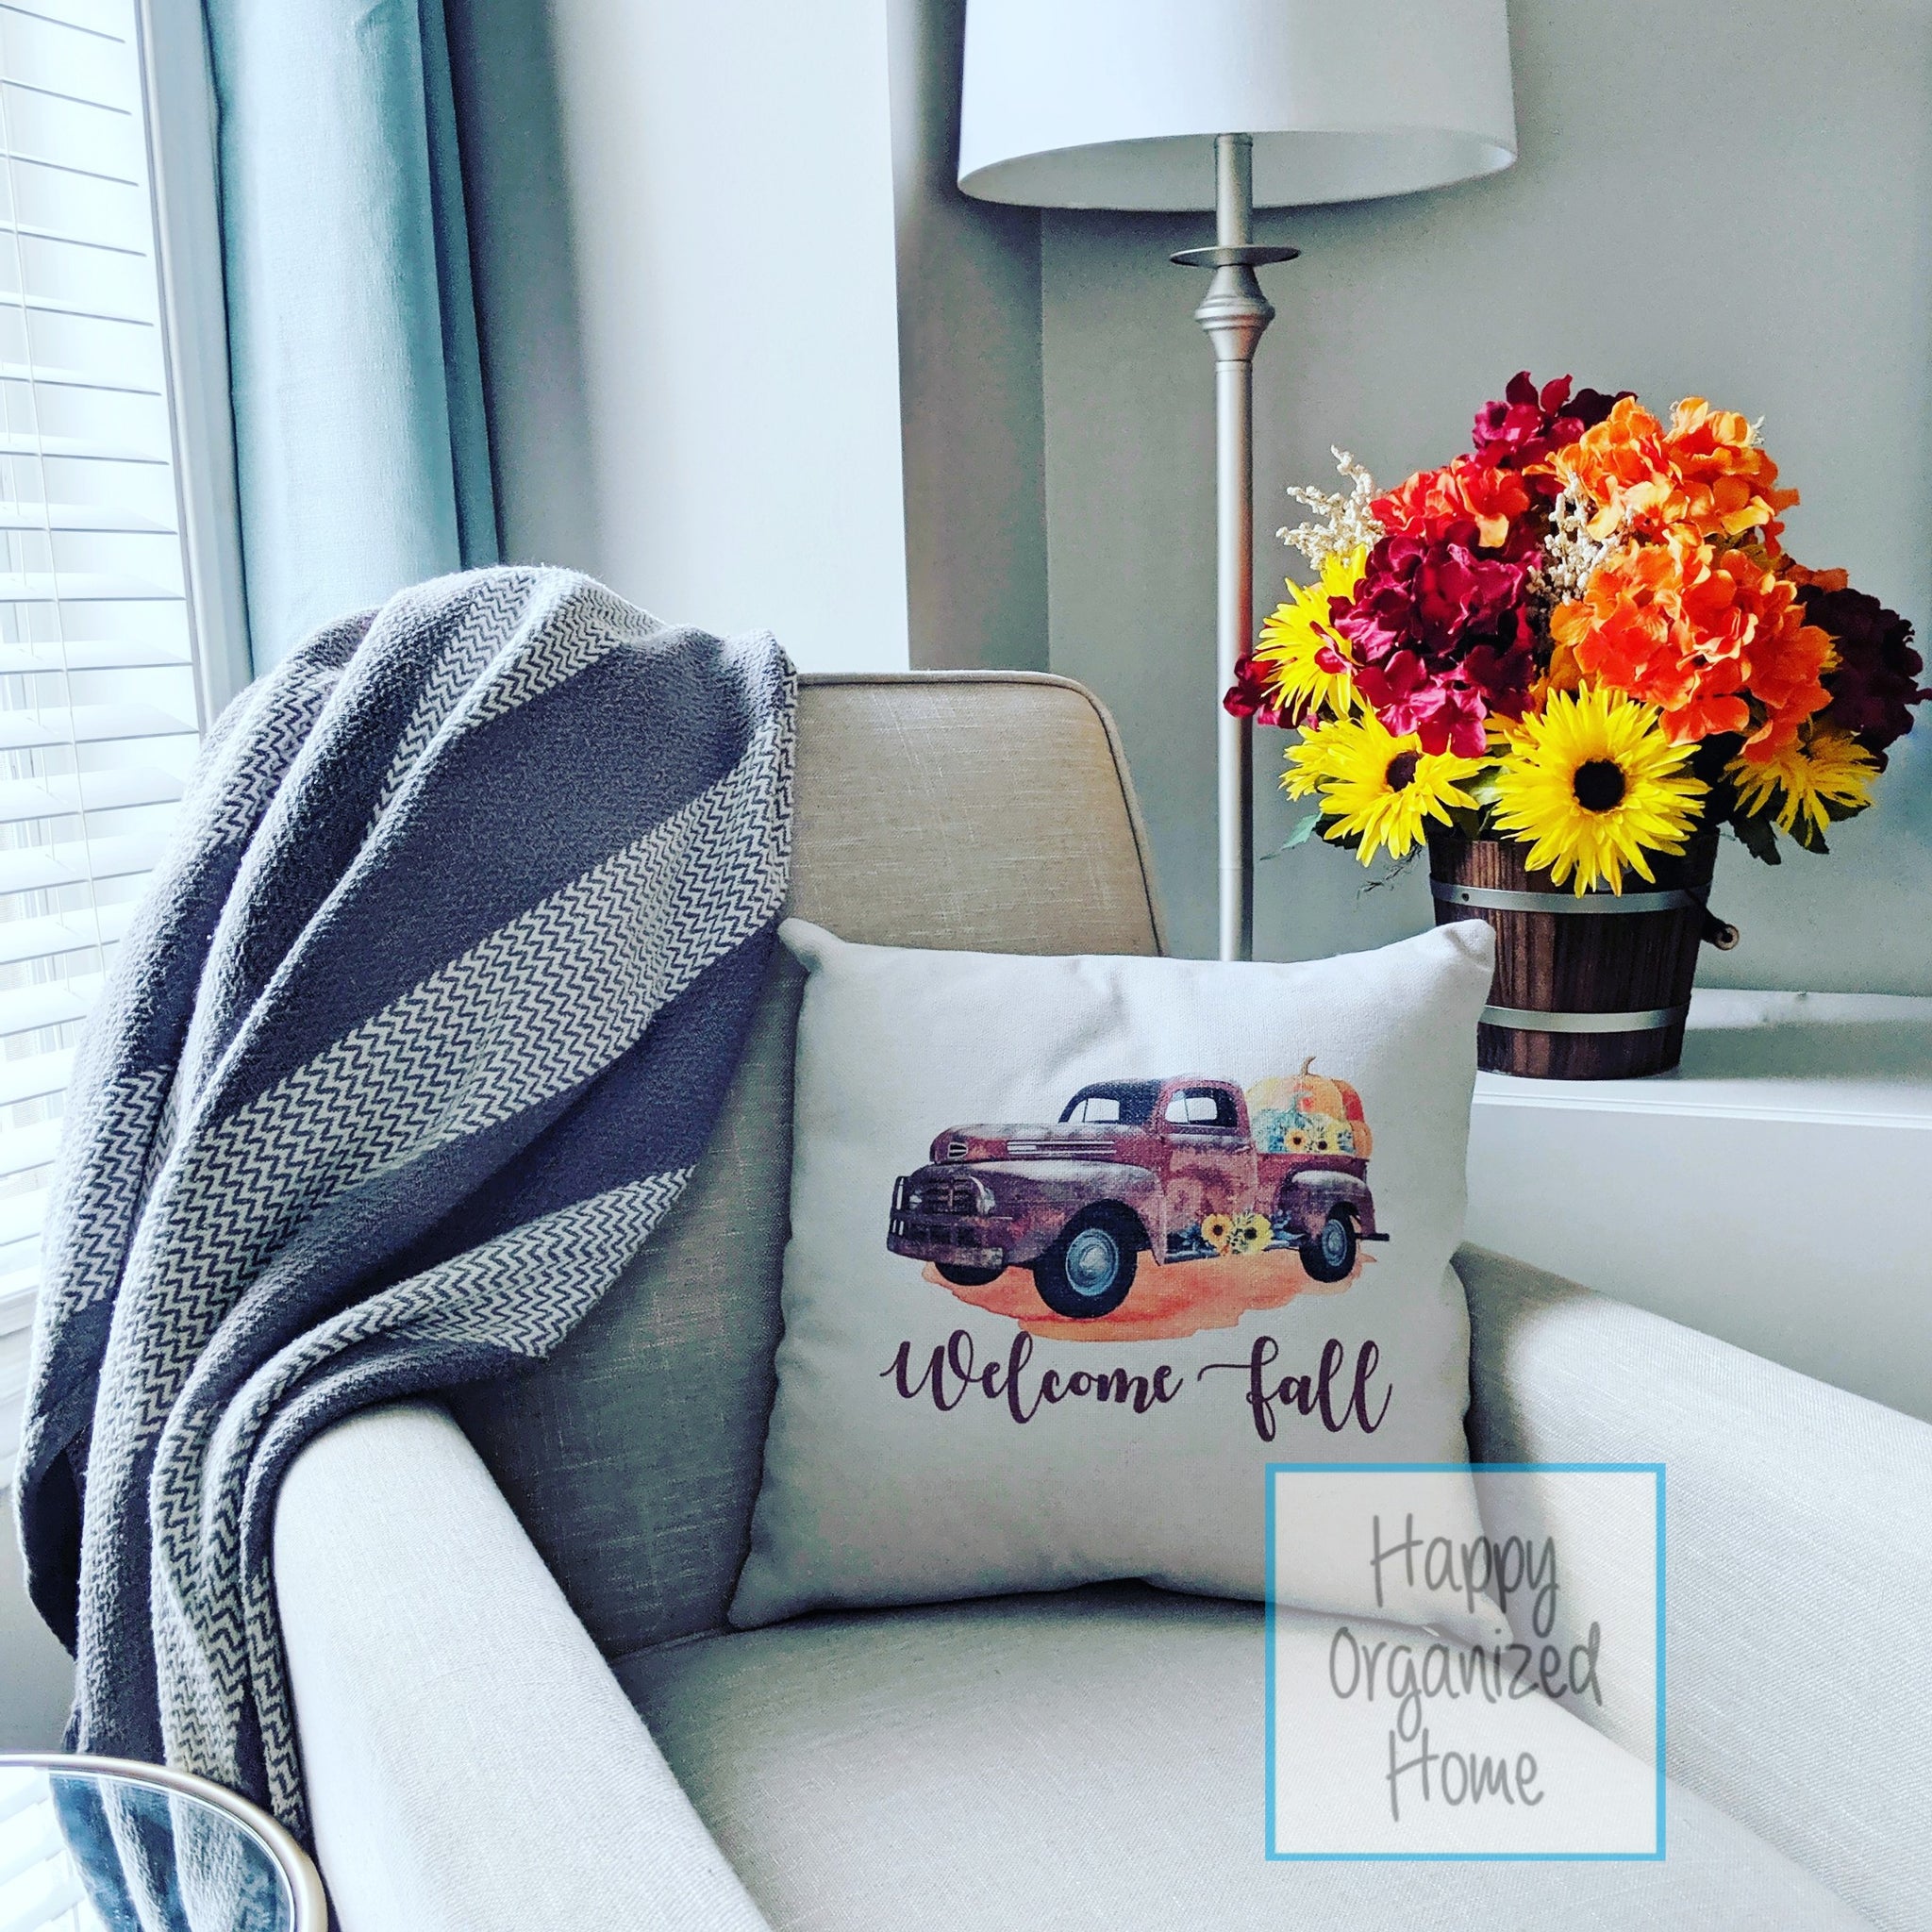 Welcome Fall Pillow with Vintage Truck